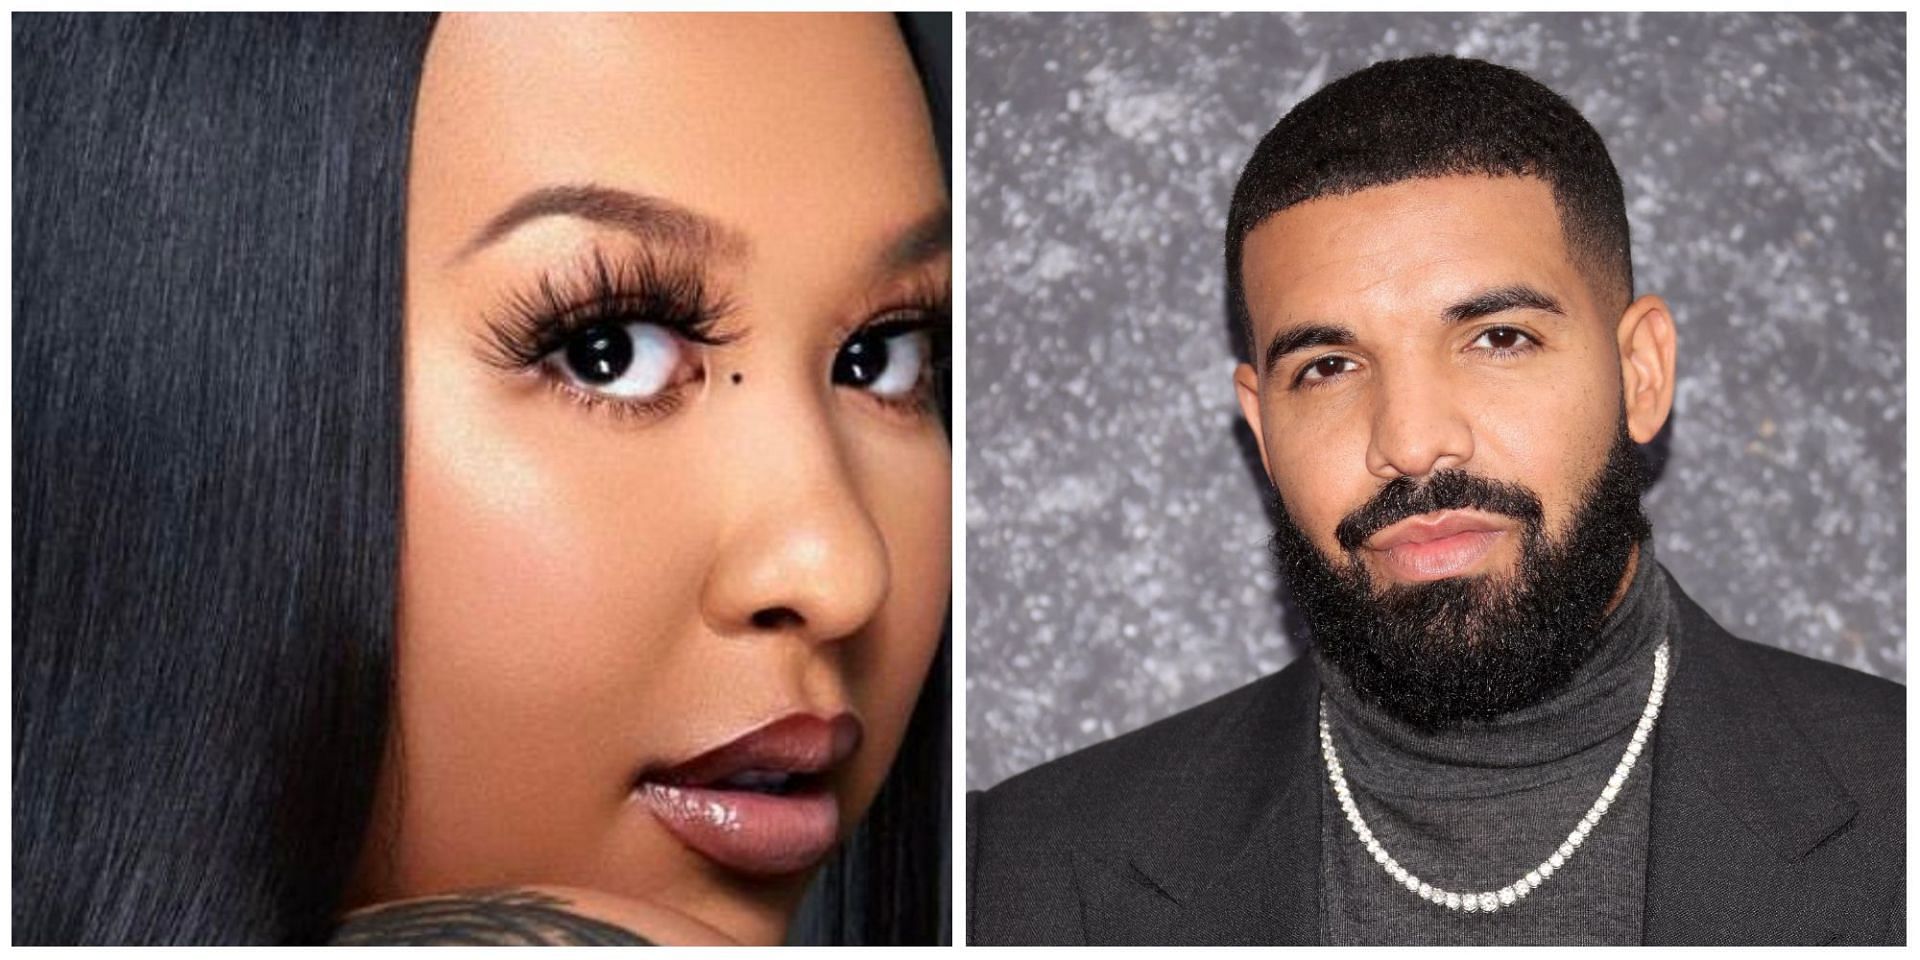 Social media users shocked after Olivia made claims about Drake being &quot;murderous.&quot; (Image via Forbes &amp; Instagram)